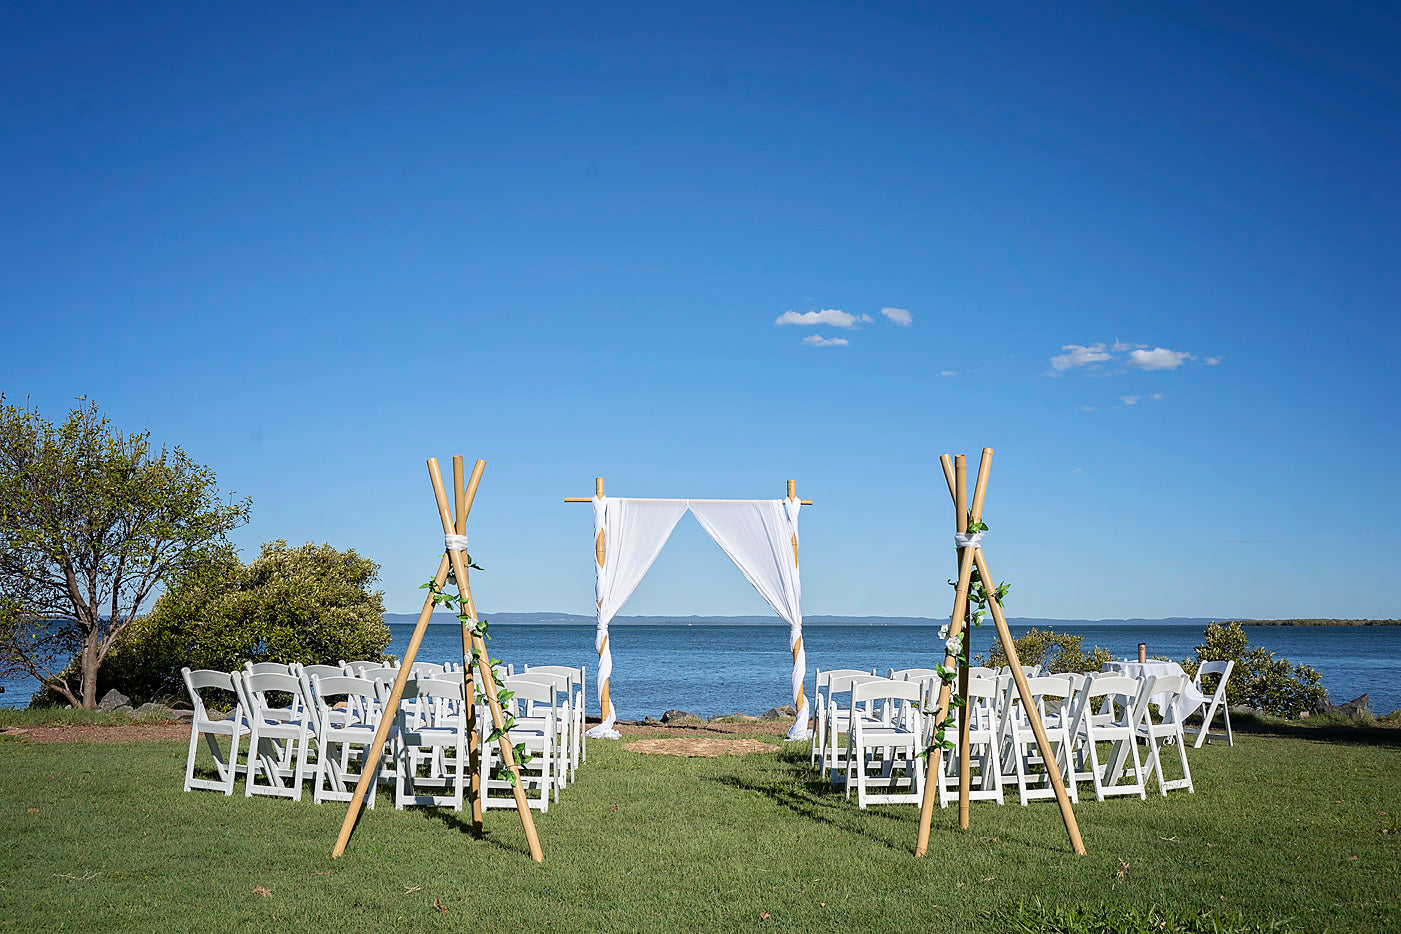 Ceremony styling - Bamboo bliss